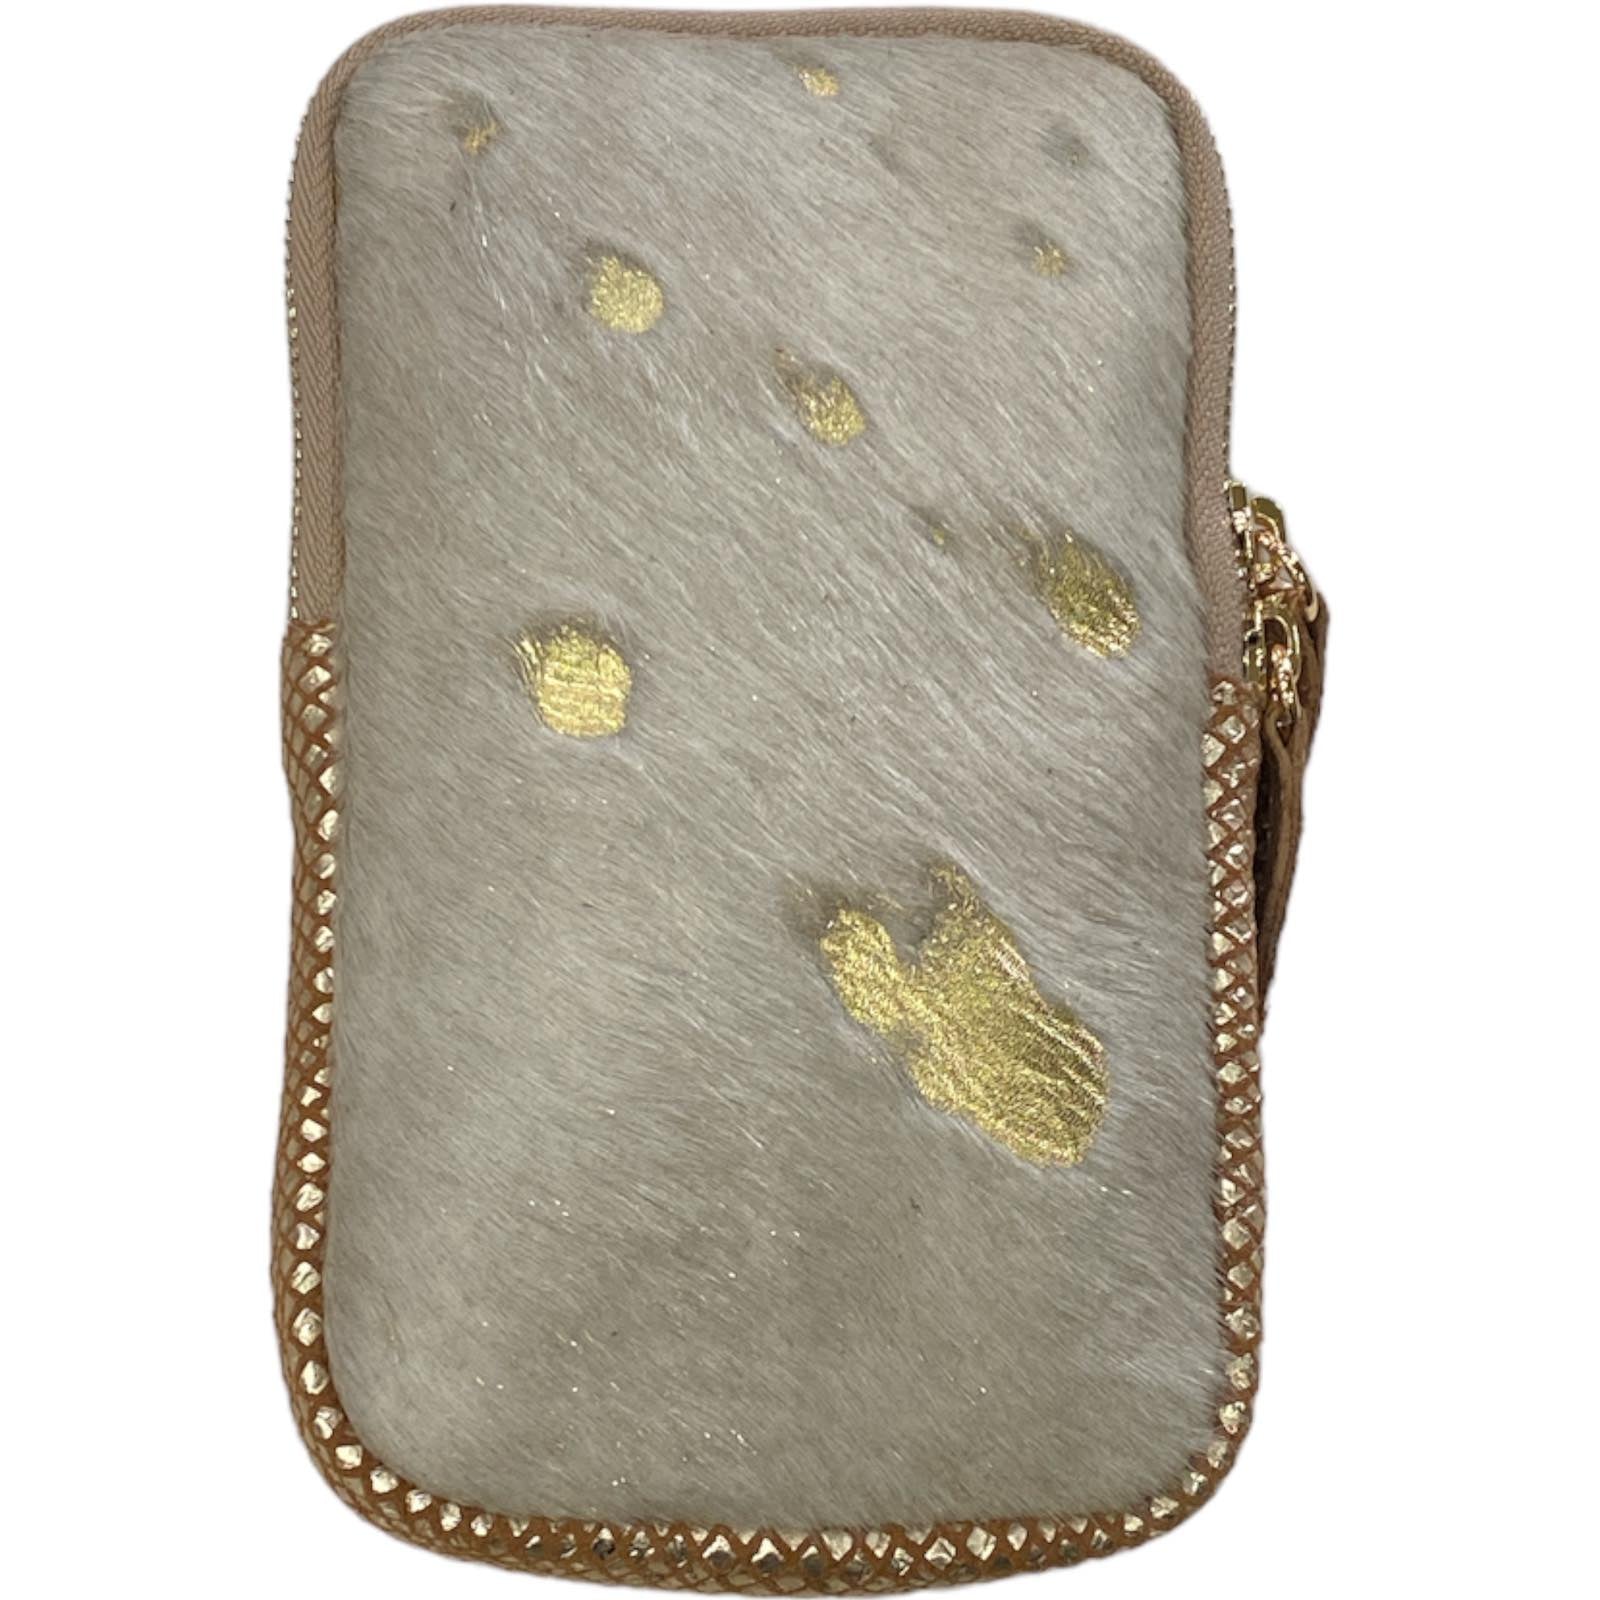 Off-white and gold vintage calf-hair mobile leather case